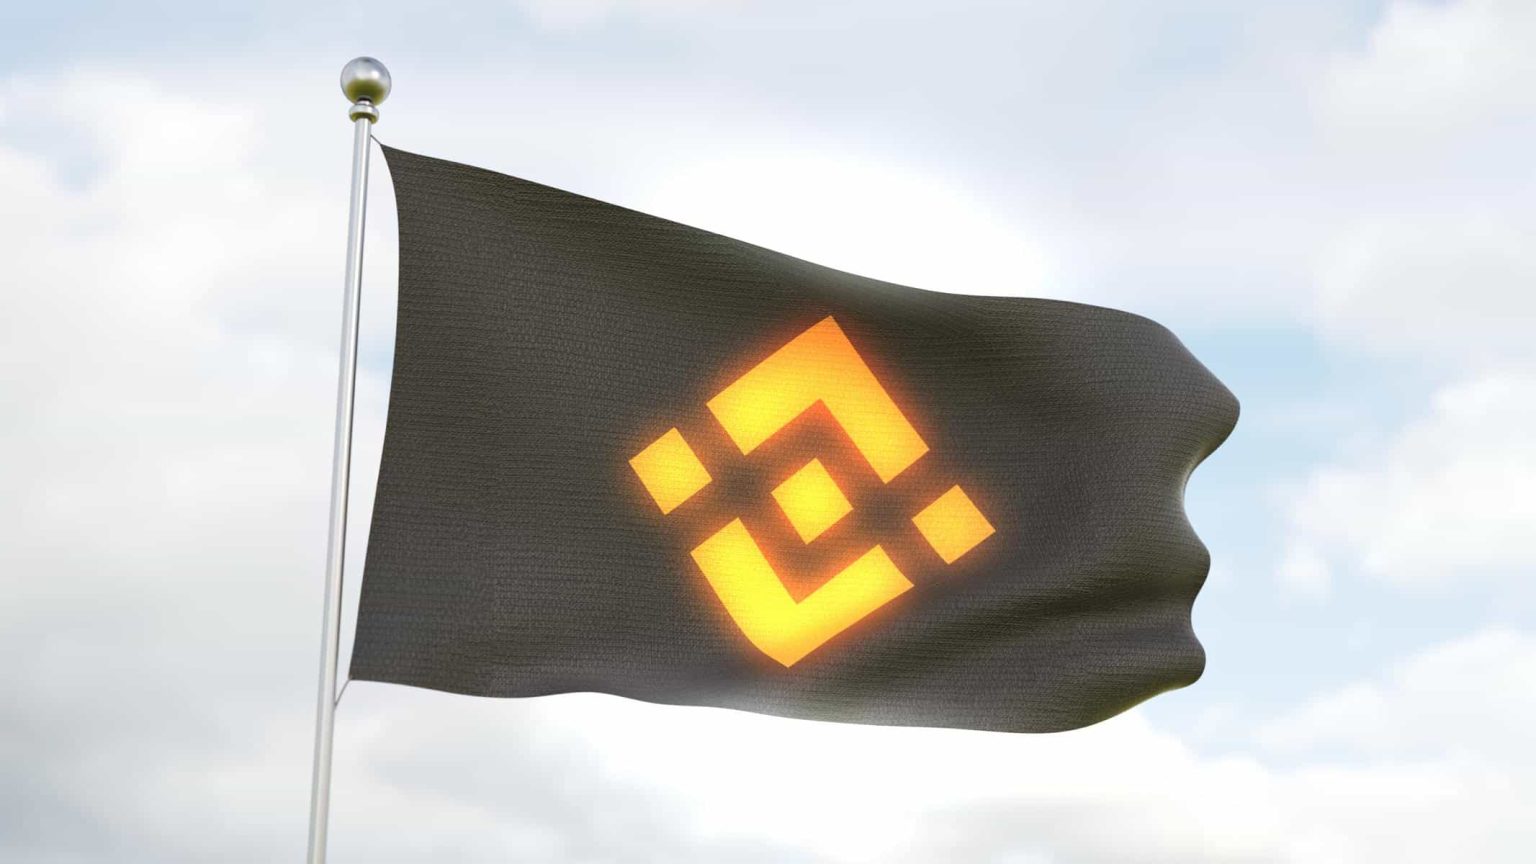 Binance-Coin-BNB-flag-waving-with-white-background